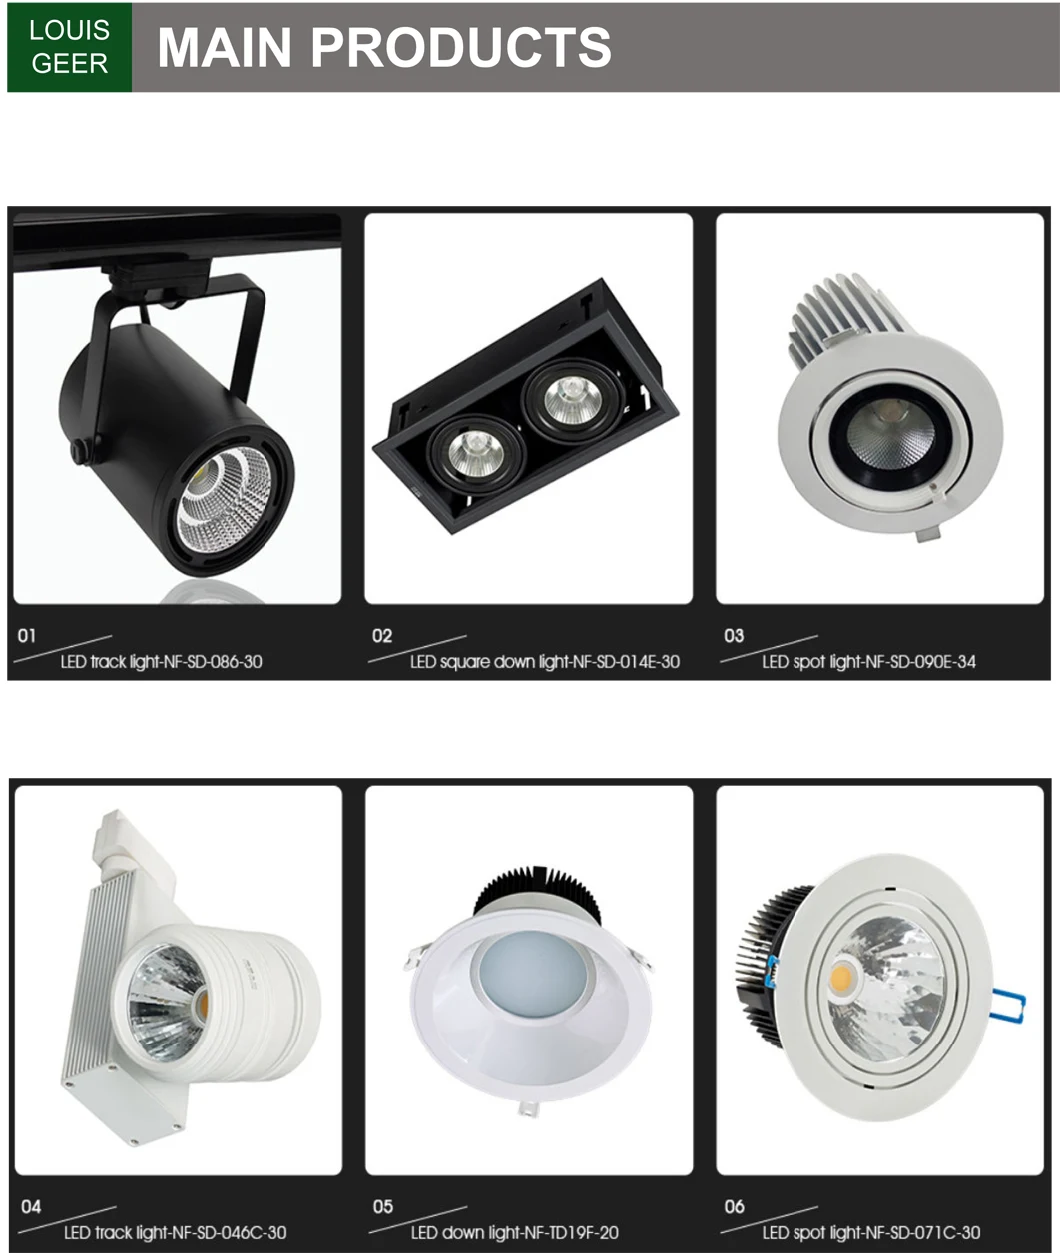 High Brightness Round Recessed LED Ceiling Light LED COB Ceiling Light for Office Club Hotel Hospital